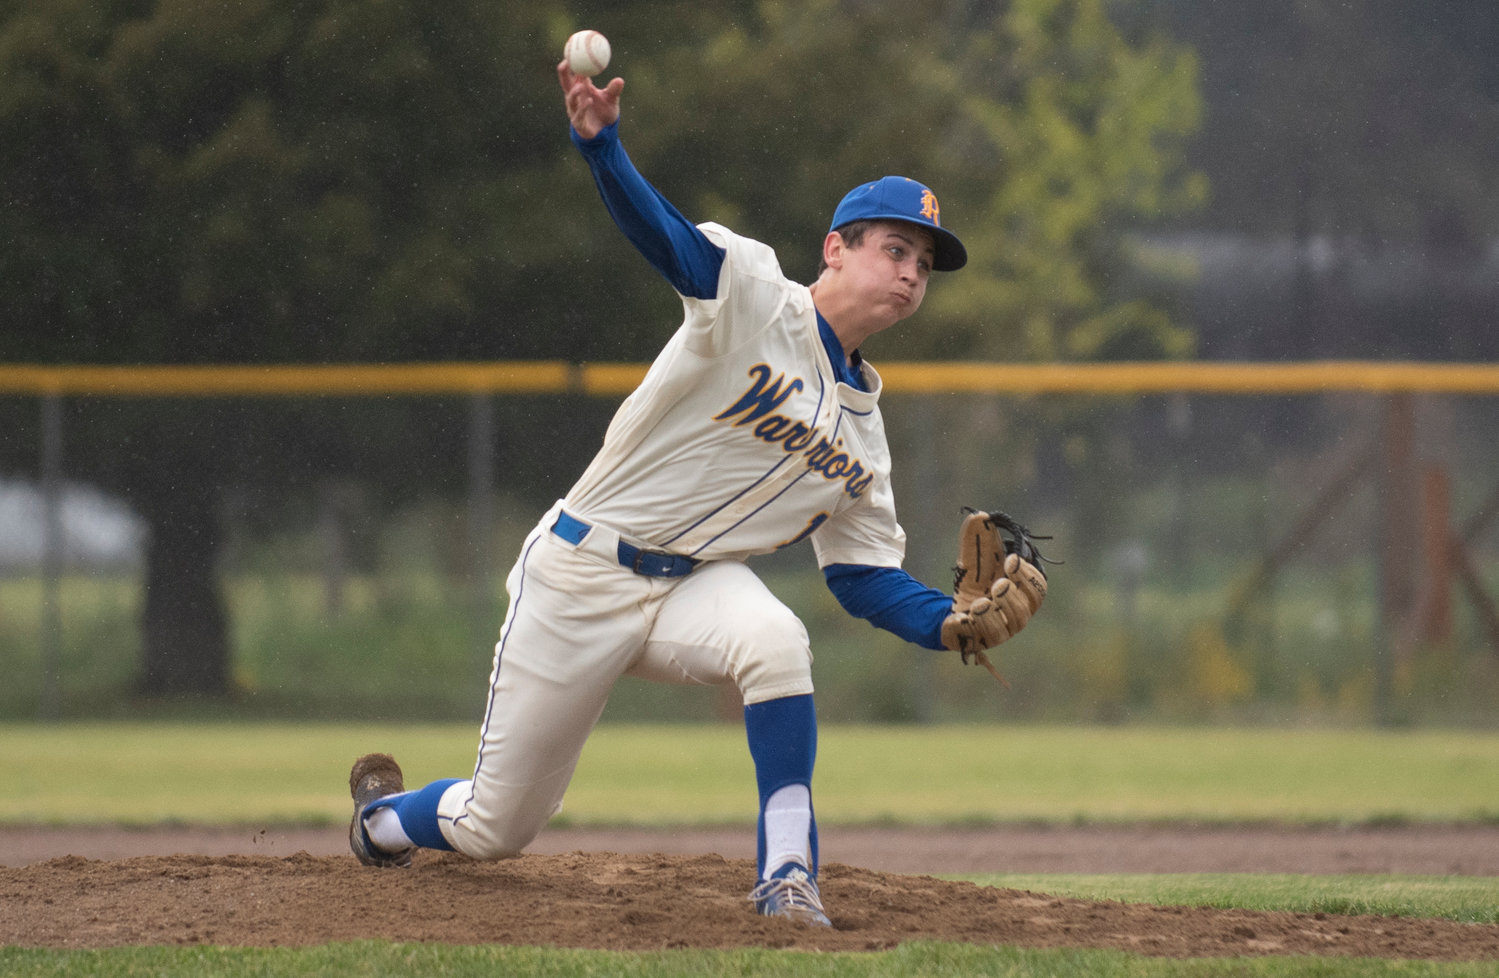 Rochester pitcher Tony Groninger delivers a pitch against Shelton on Monday.